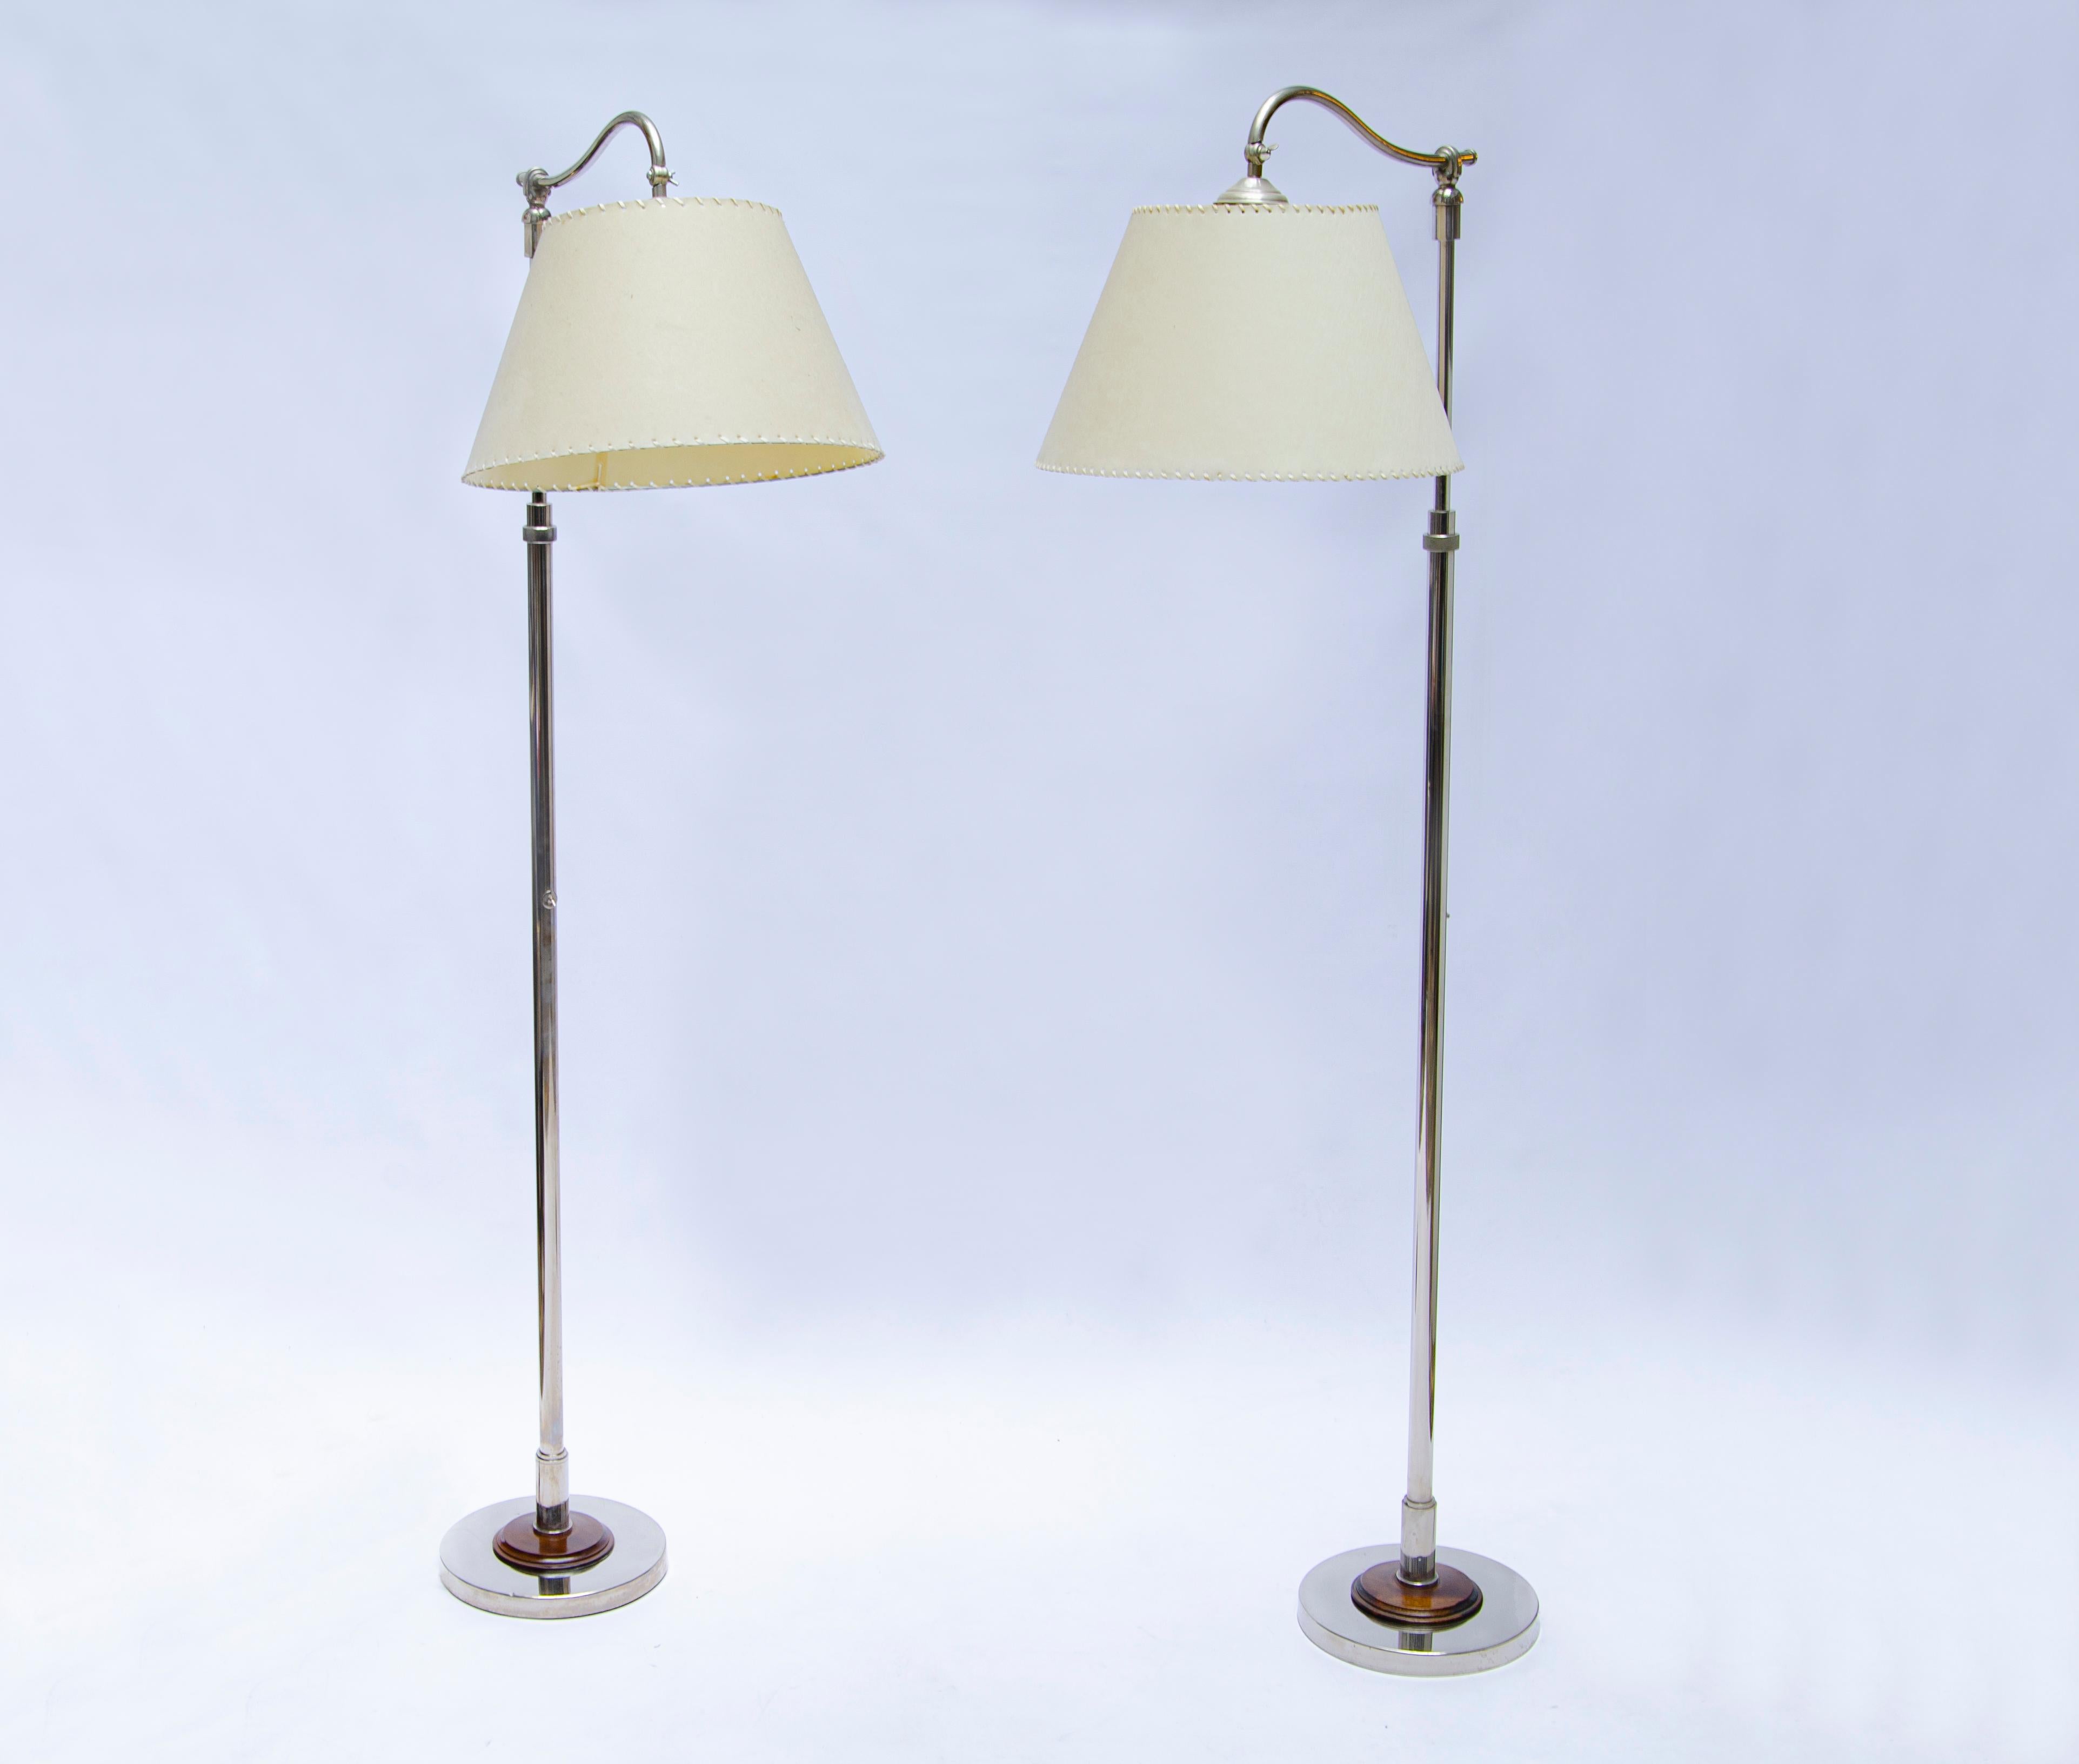 Pair of standing lamps with adjustable height by COMTE. The lamp has a mechanism to adjust the heights as well to change the direction of the shade. Produced in chromed bronze with caoba wood details.

Argentina, CIRCA 1940.